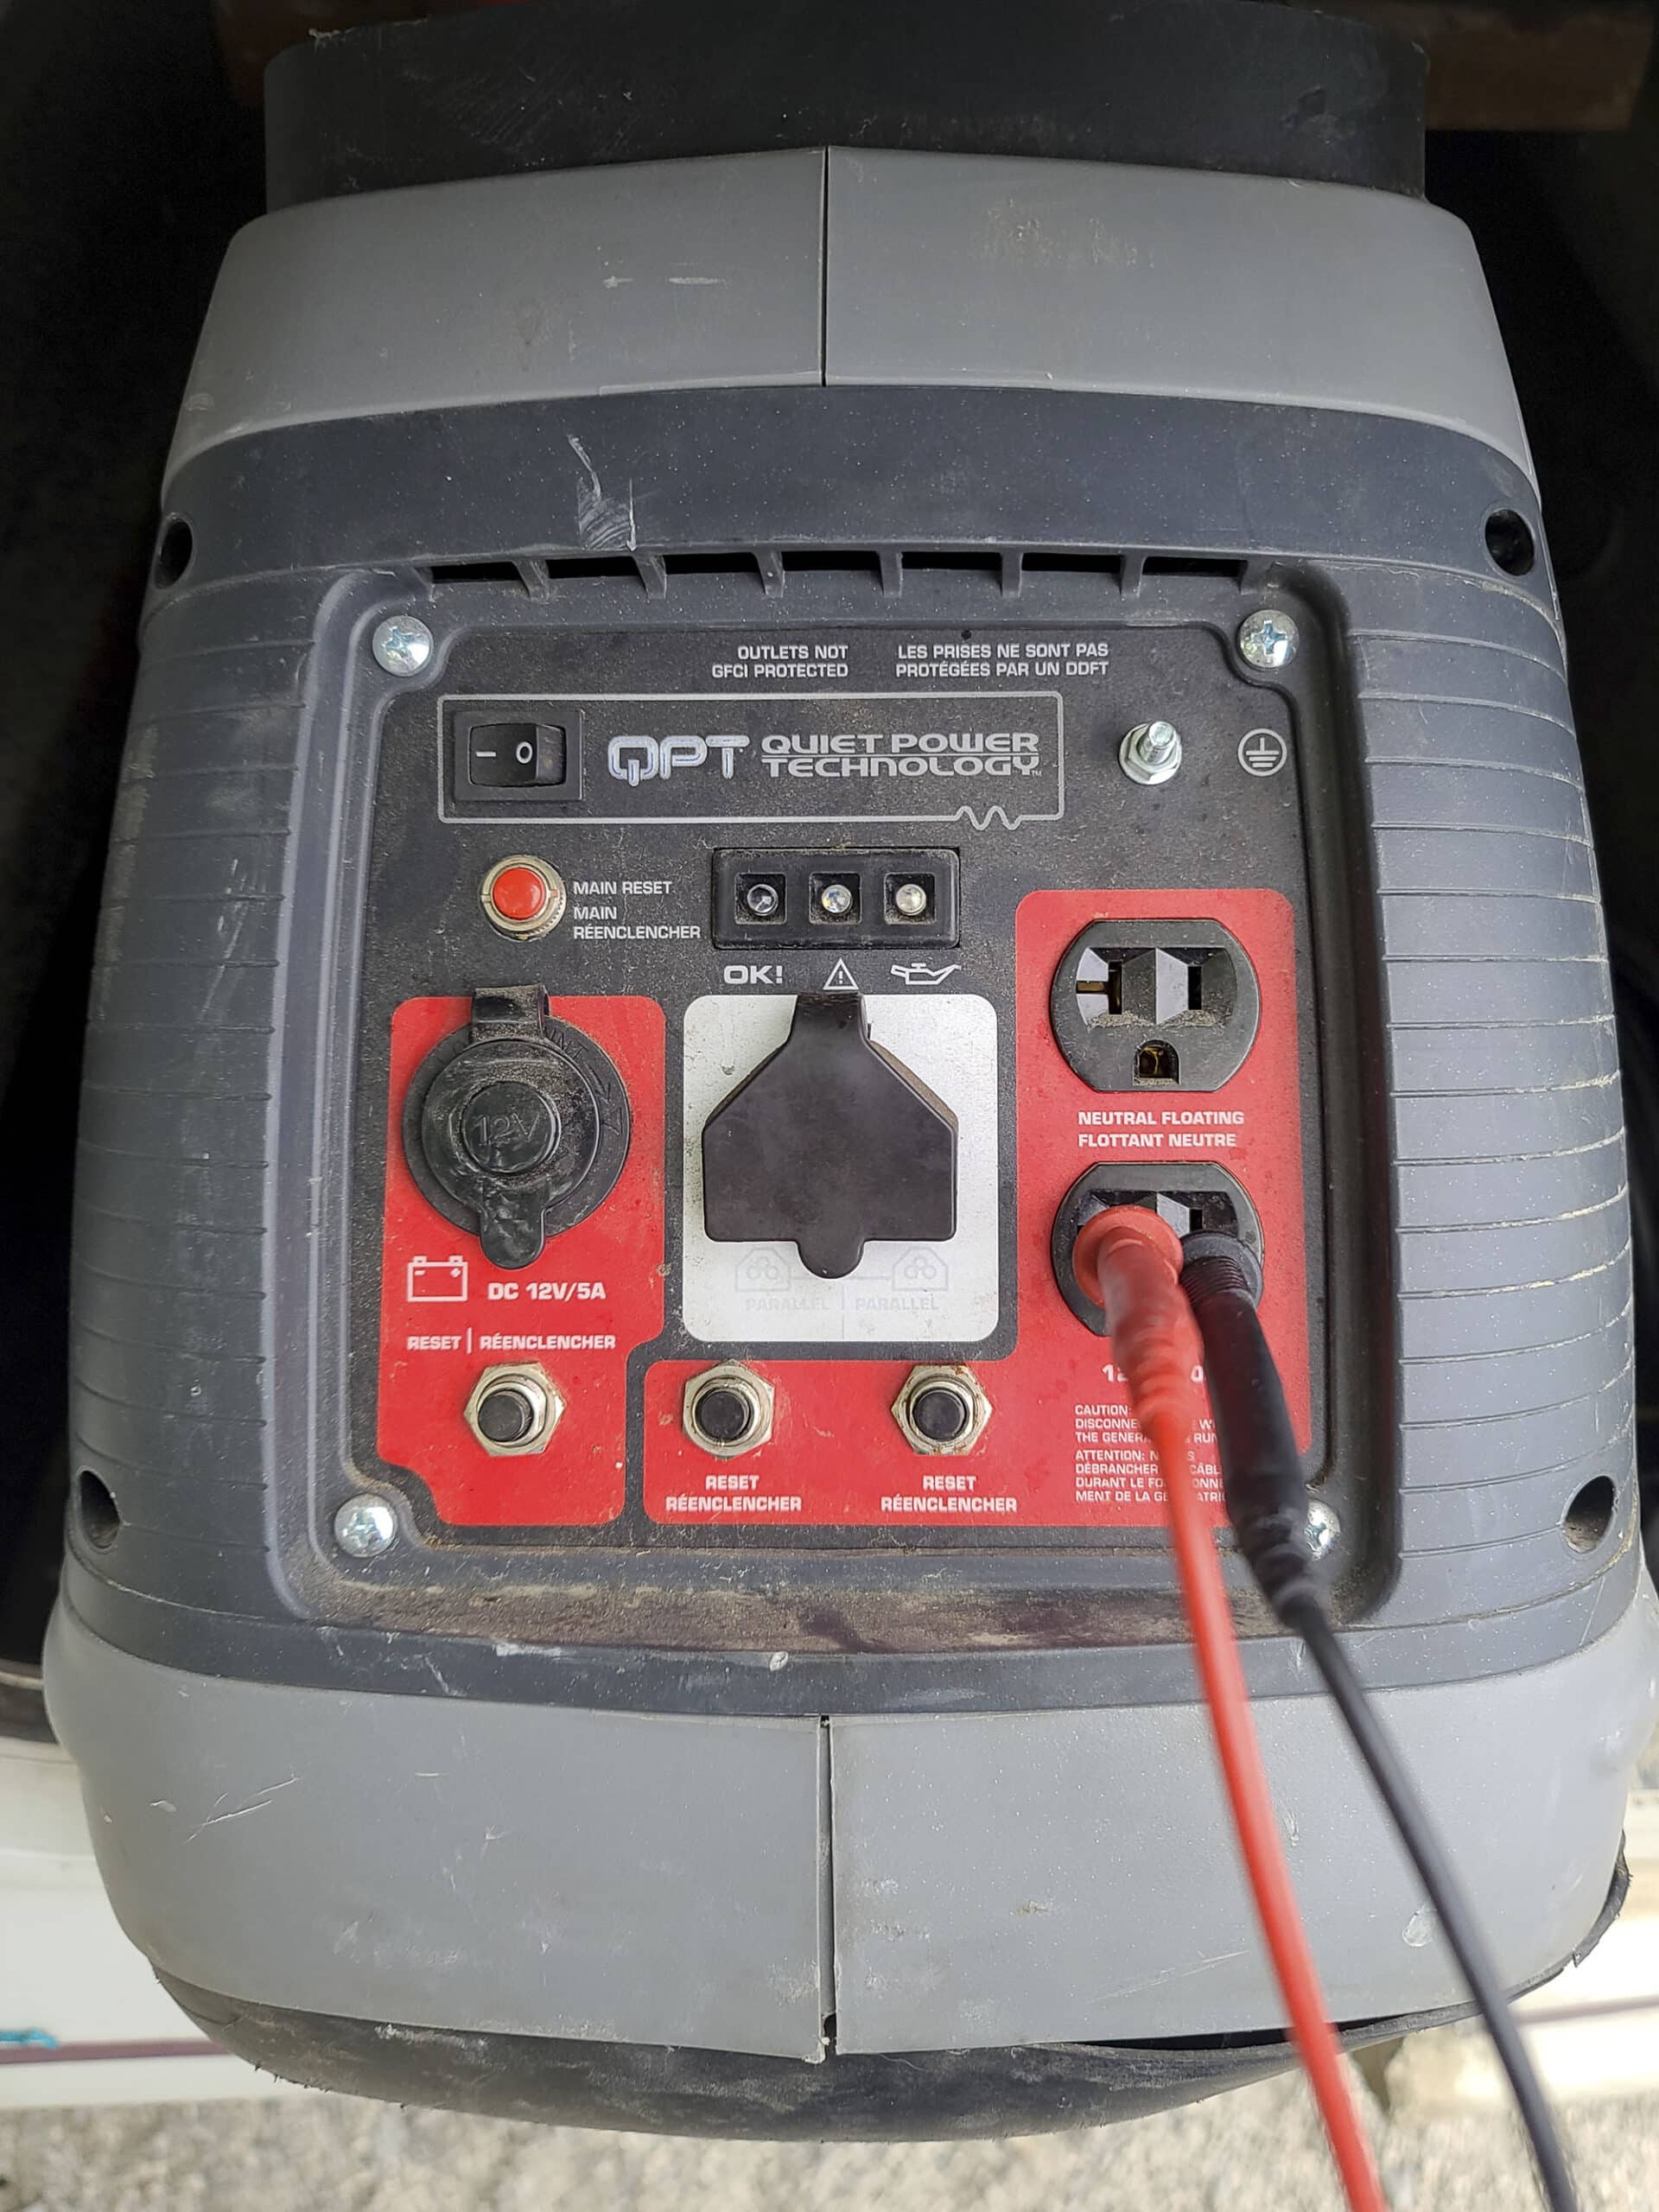 The front panel of a gray generator.  Plugs and buttons can be seen.